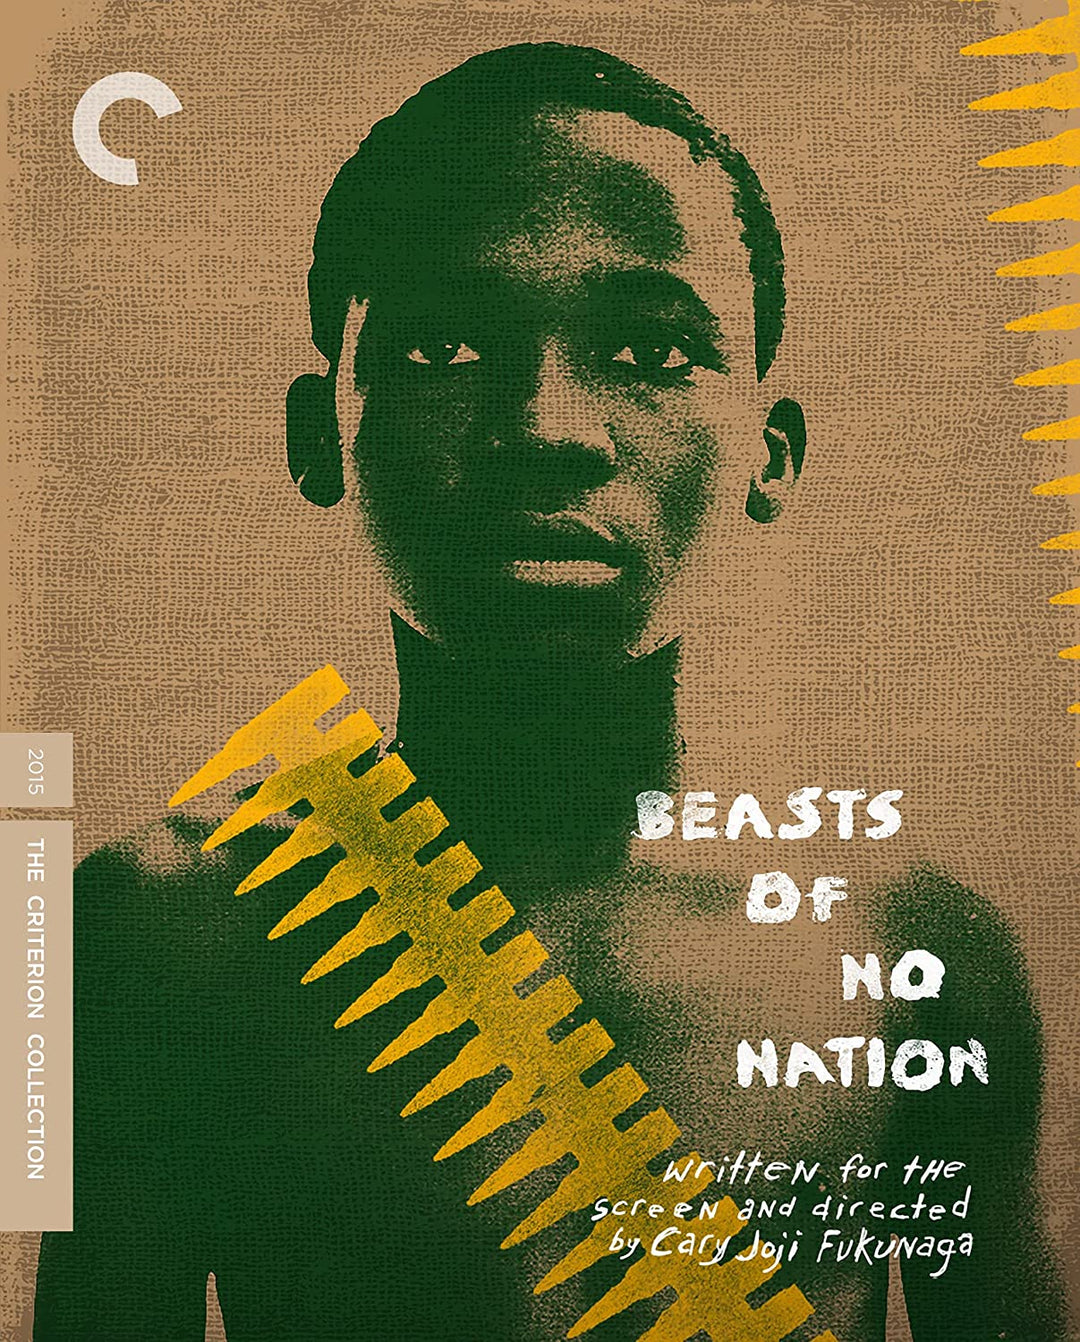 Beasts Of No Nation (2015) (Criterion Collection) UK Only - War/Drama [BLu-ray]